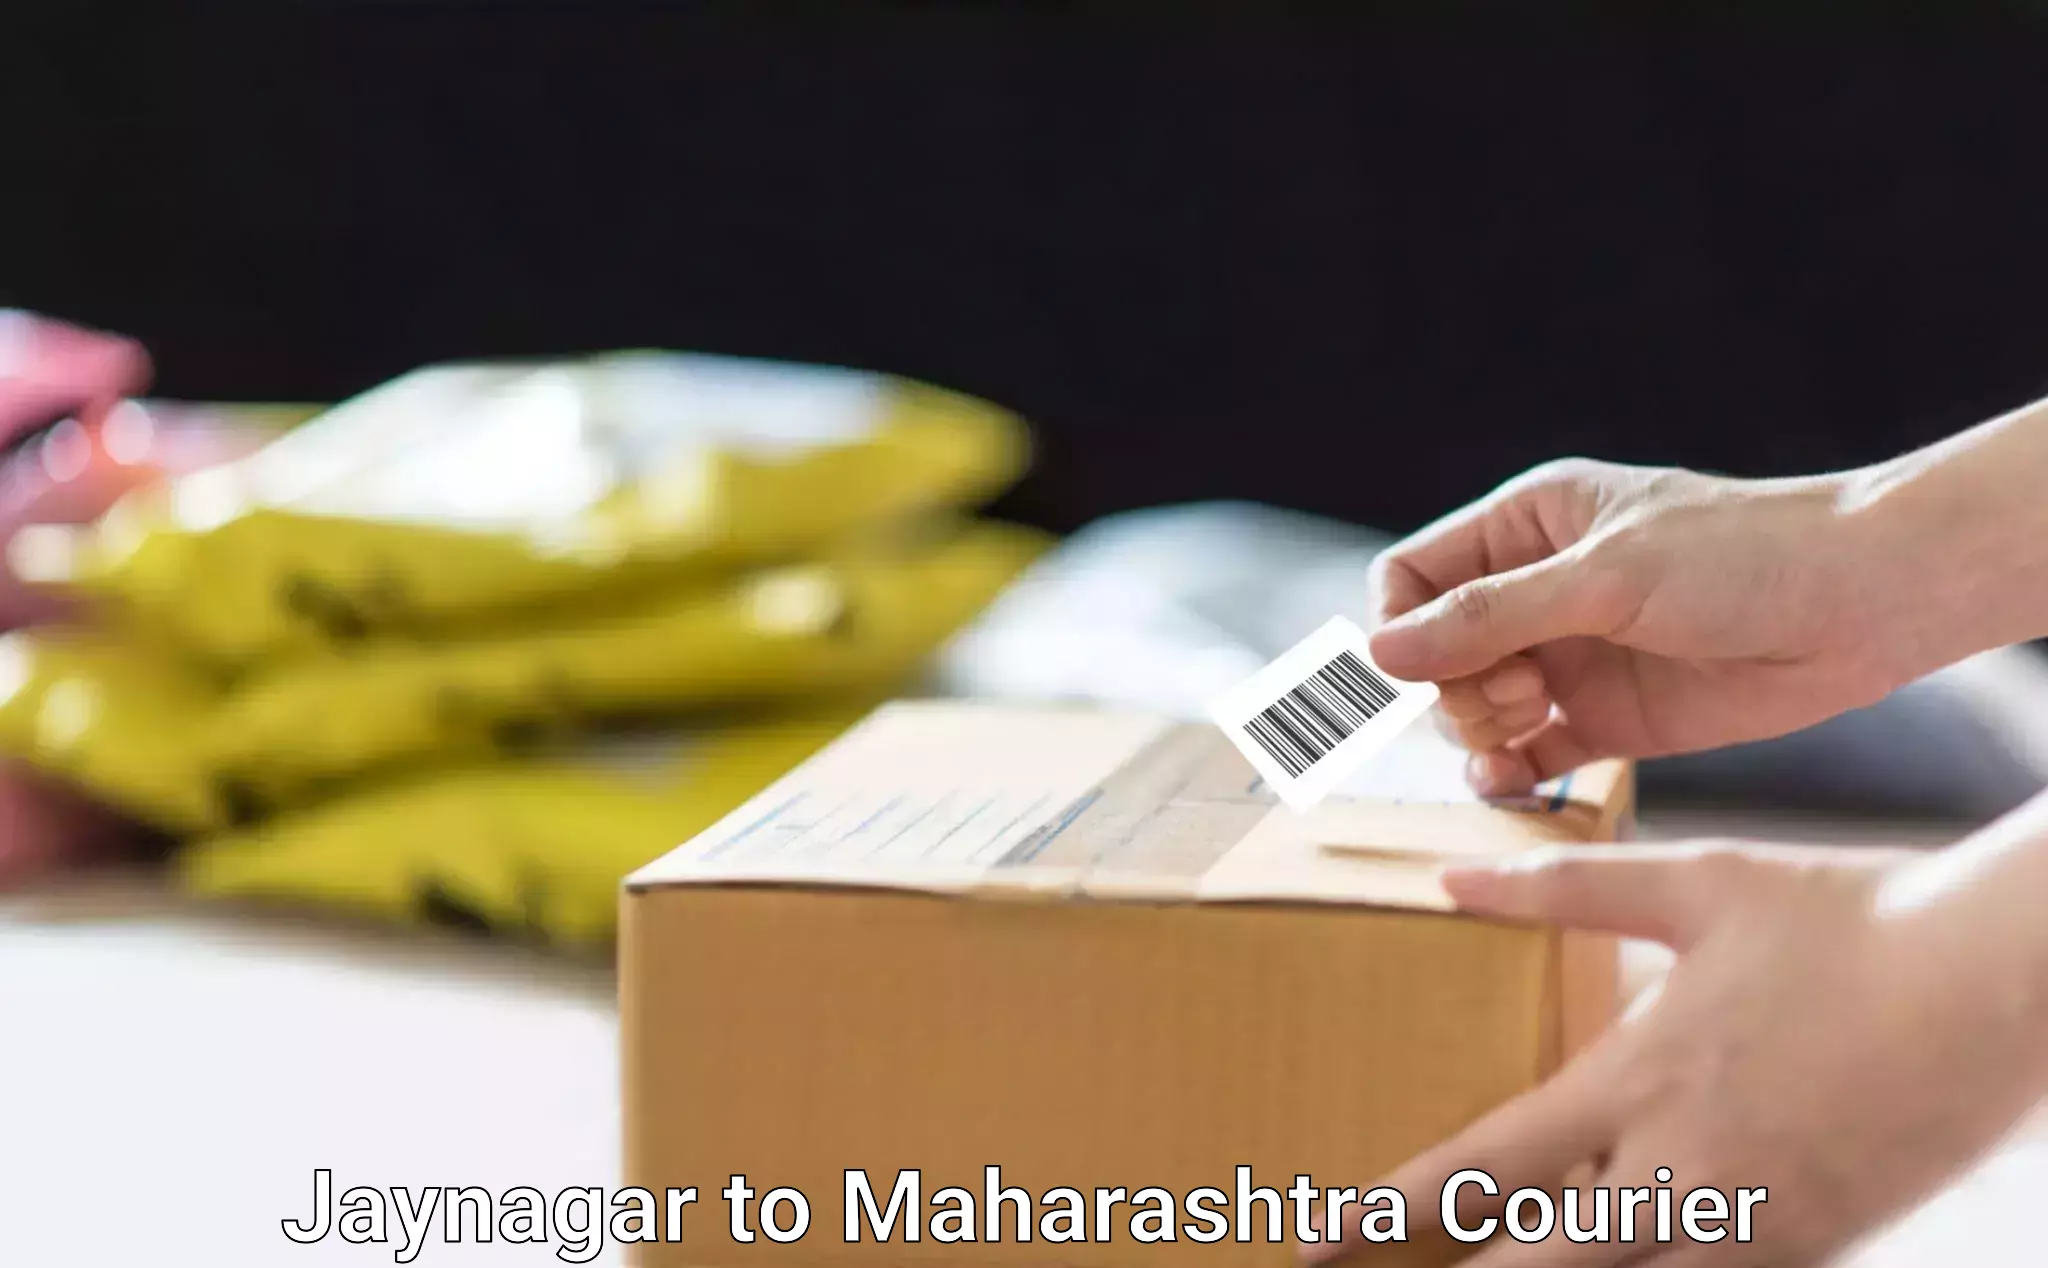 High-quality moving services in Jaynagar to Maharashtra